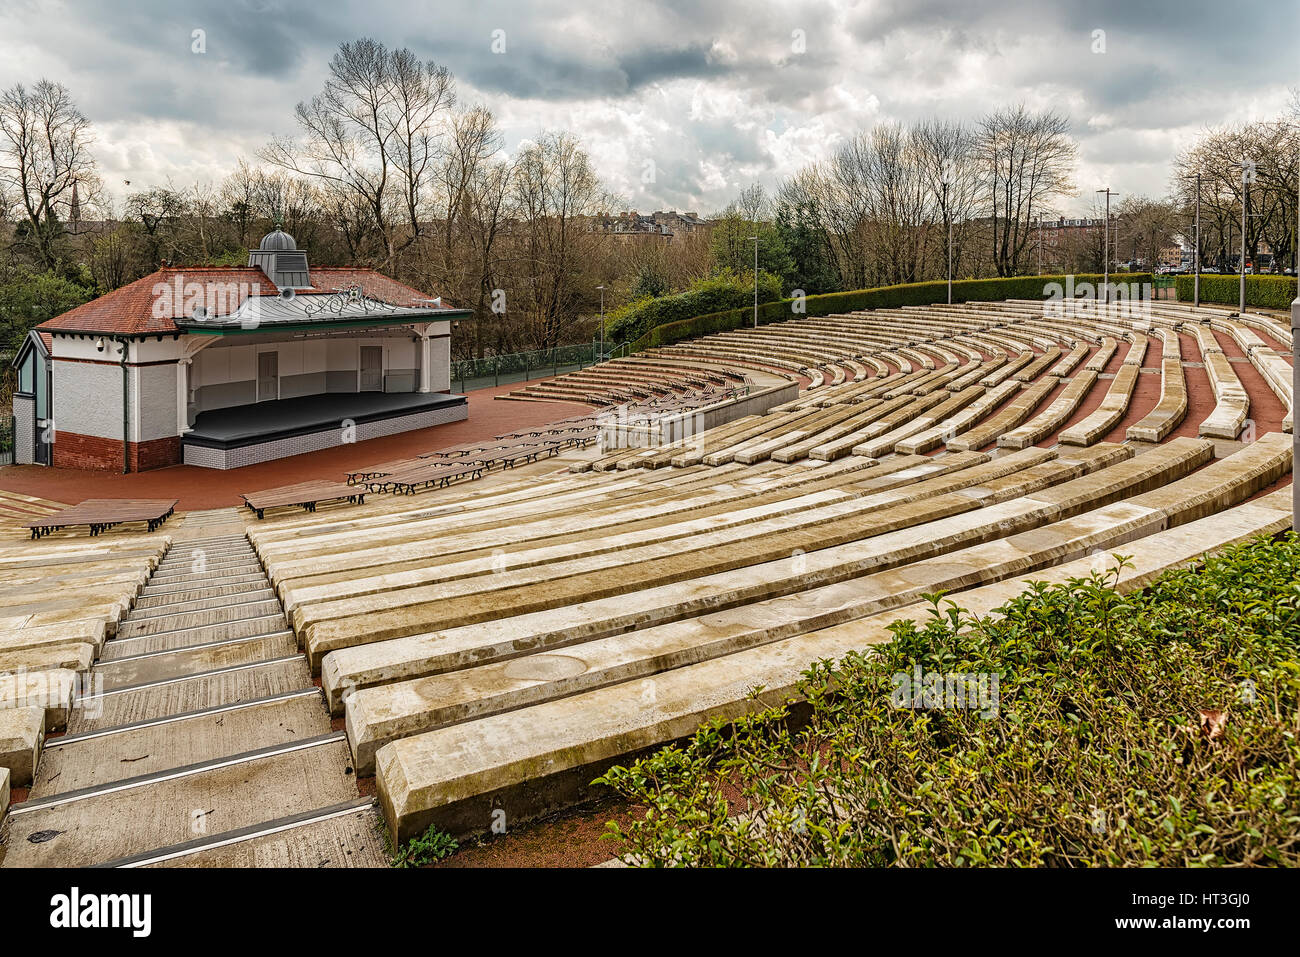 The Kelvingrove park bandstand situated in the west end area of Glasgow, Scotland. Stock Photo